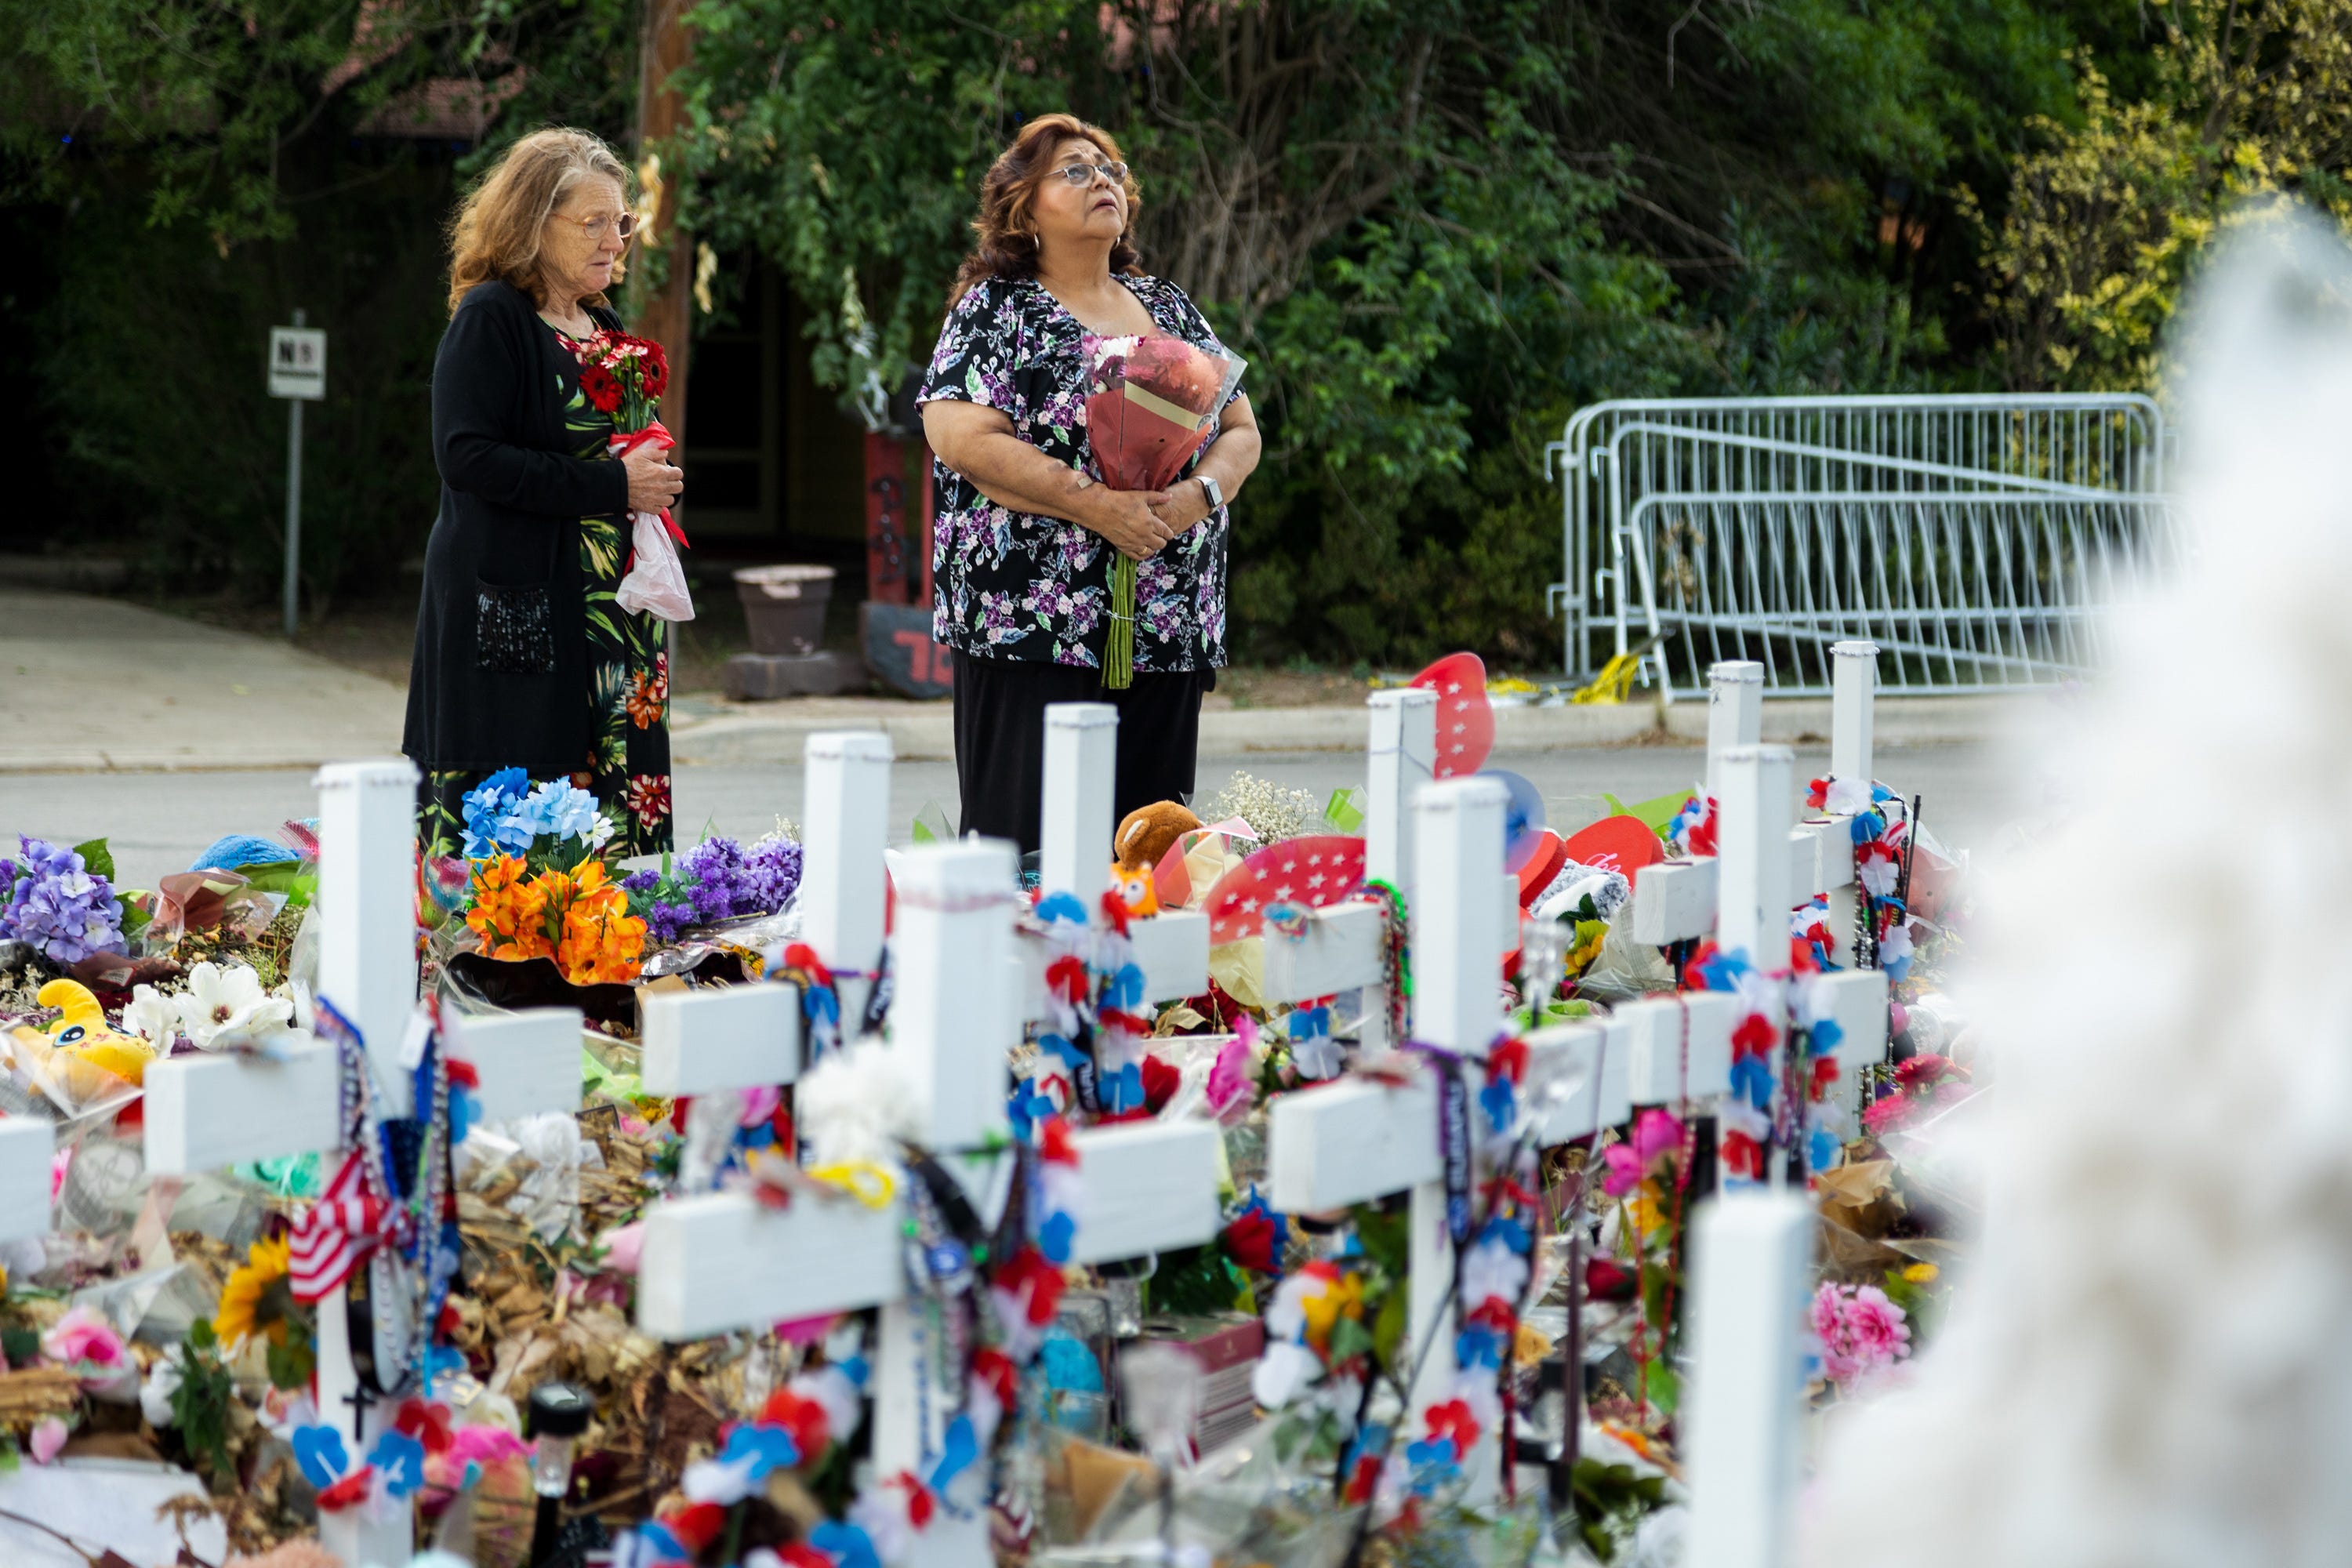 Julie Brown and Irene Marin of San Antonio bring flowers to lay at the memorial for the 21 victims of the school shooting at Robb Elementary in Uvalde, on June 9, 2022.